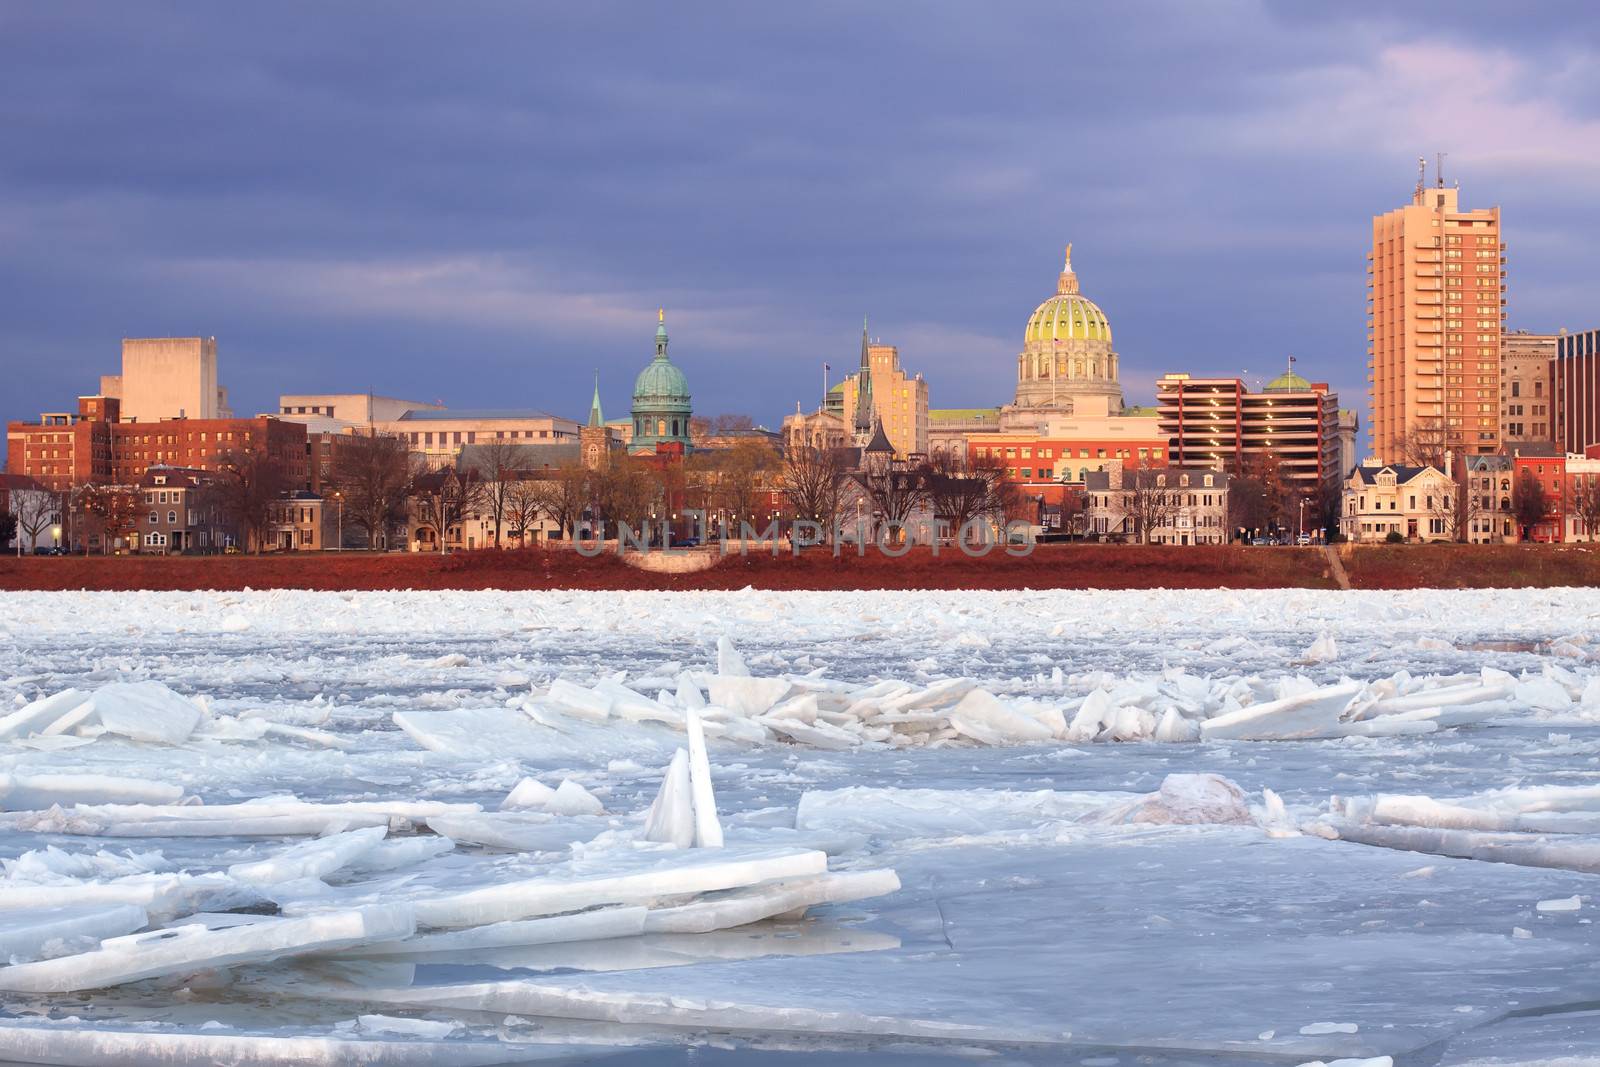 River Ice at Harrisburg by DelmasLehman